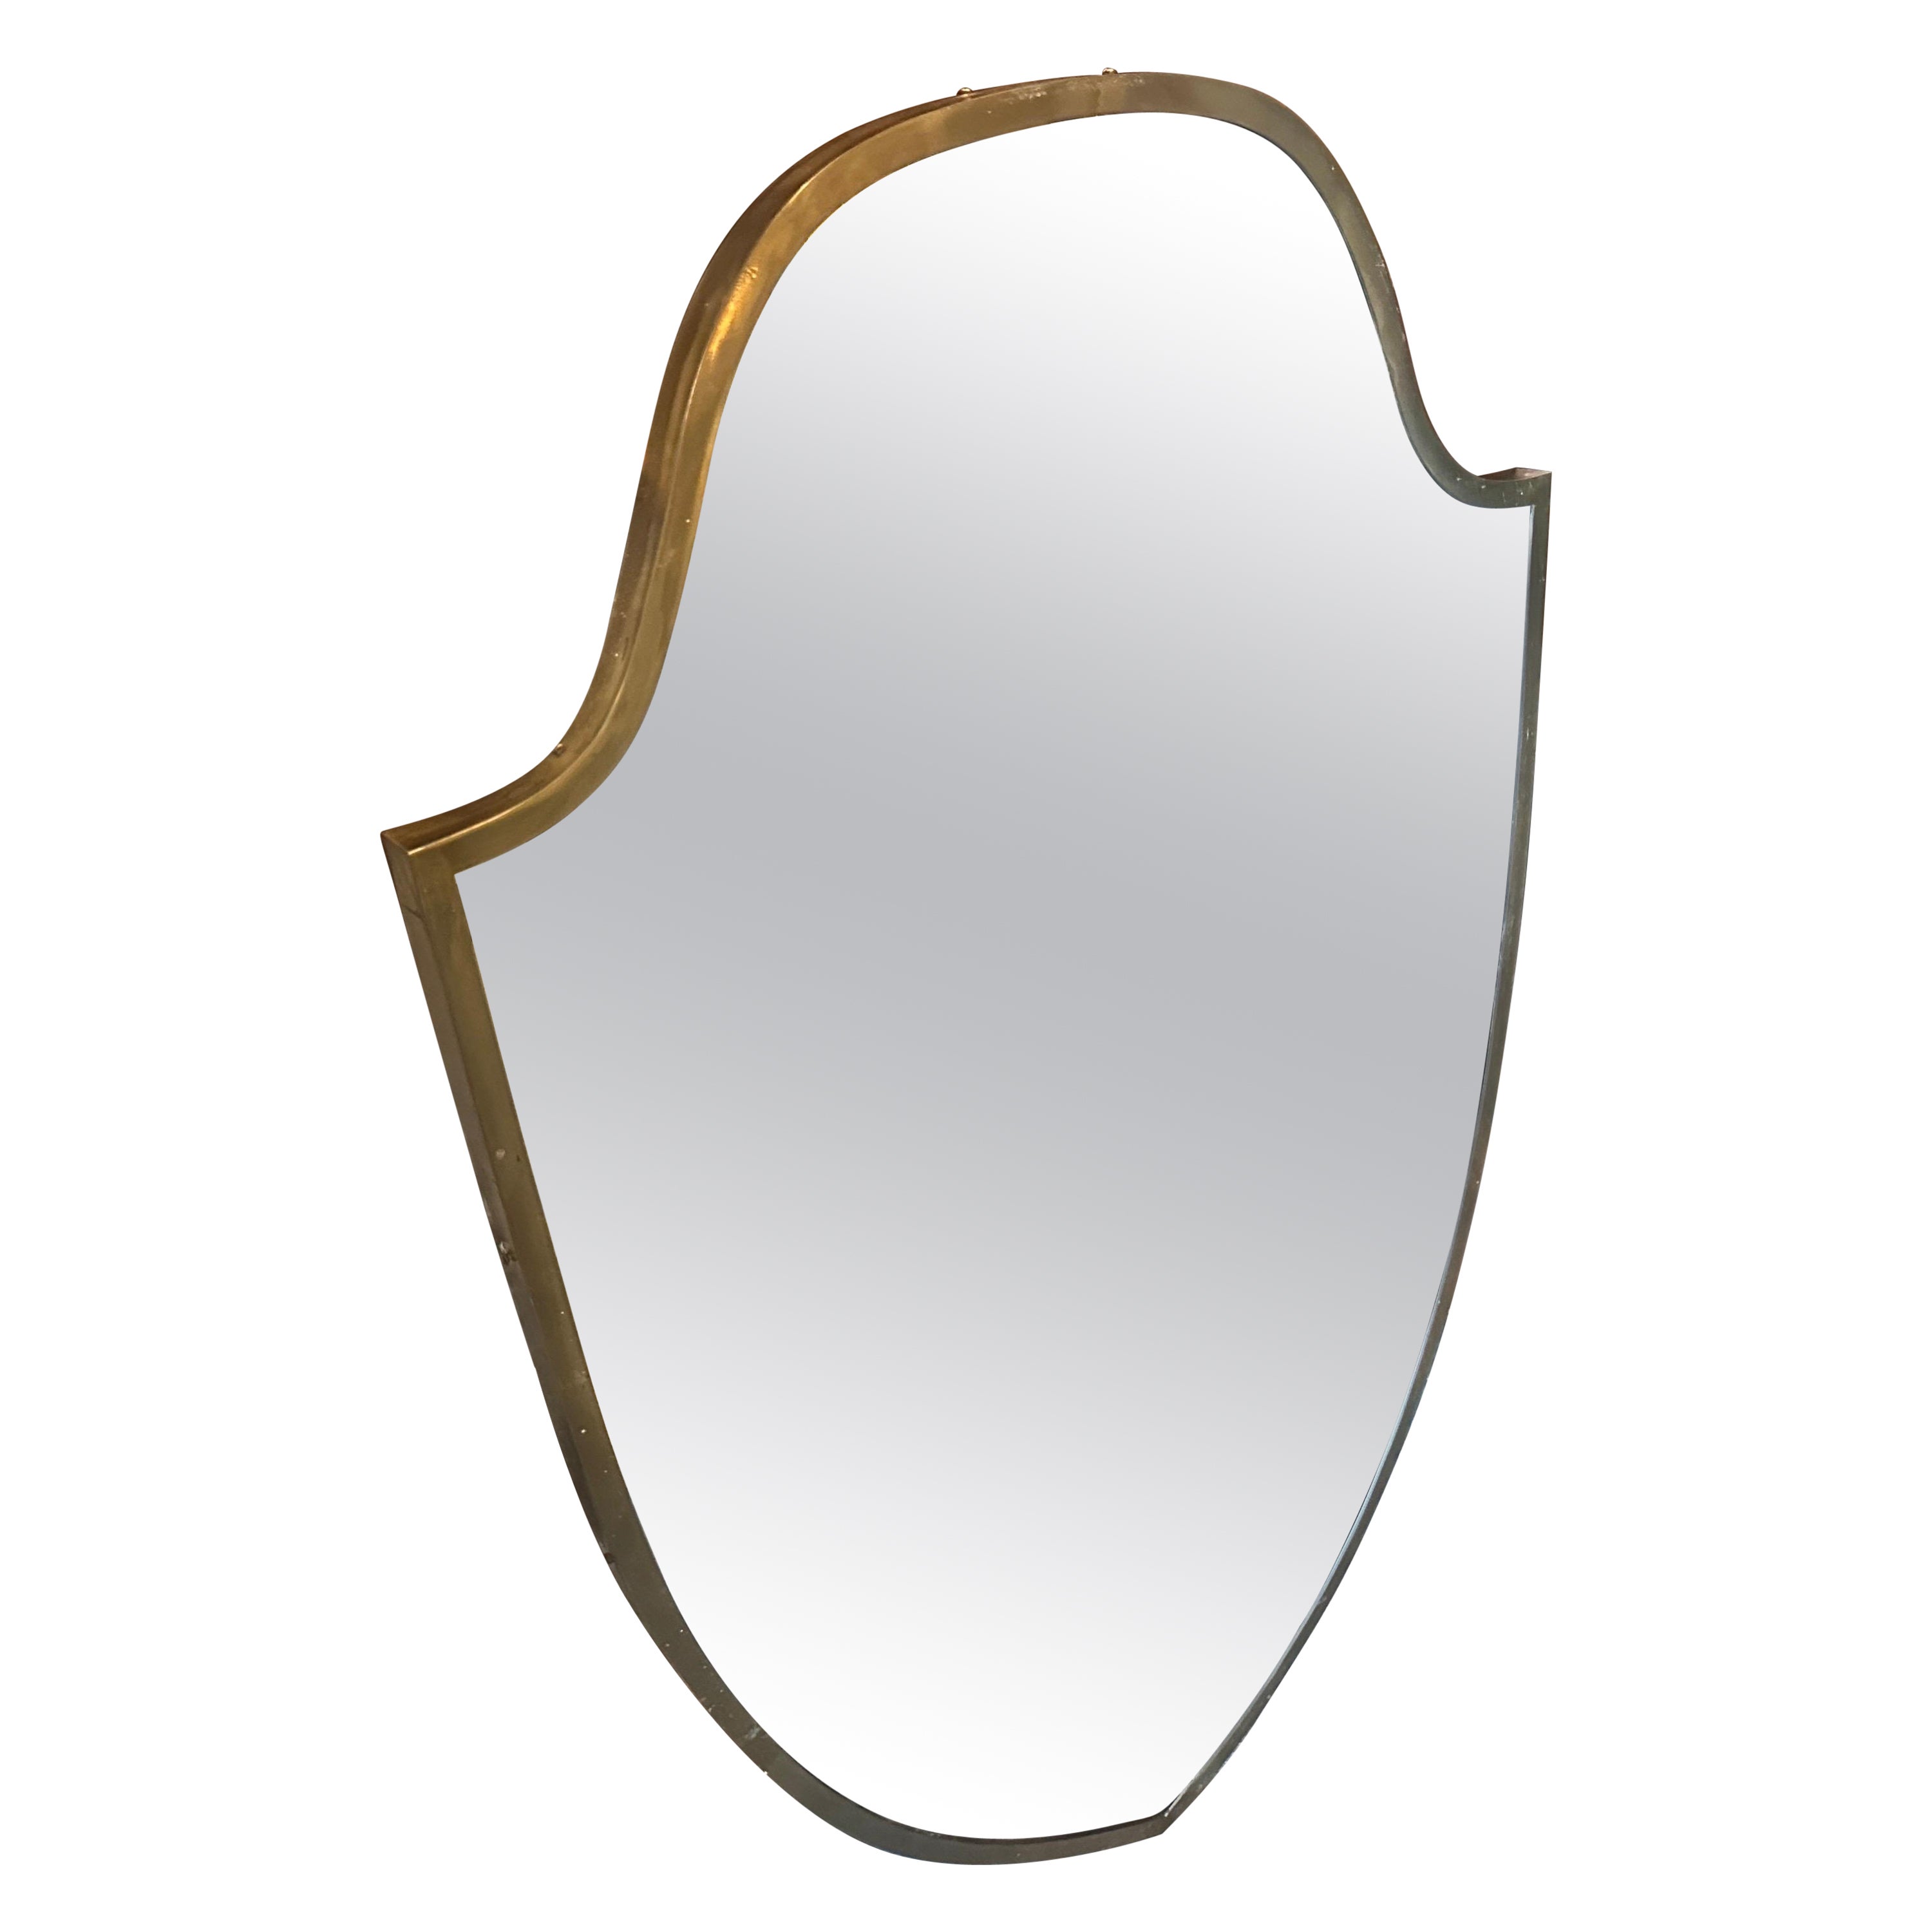 1950s Gio Ponti Style Mid-Century Modern Brass Shield Shaped Big wall Mirror For Sale